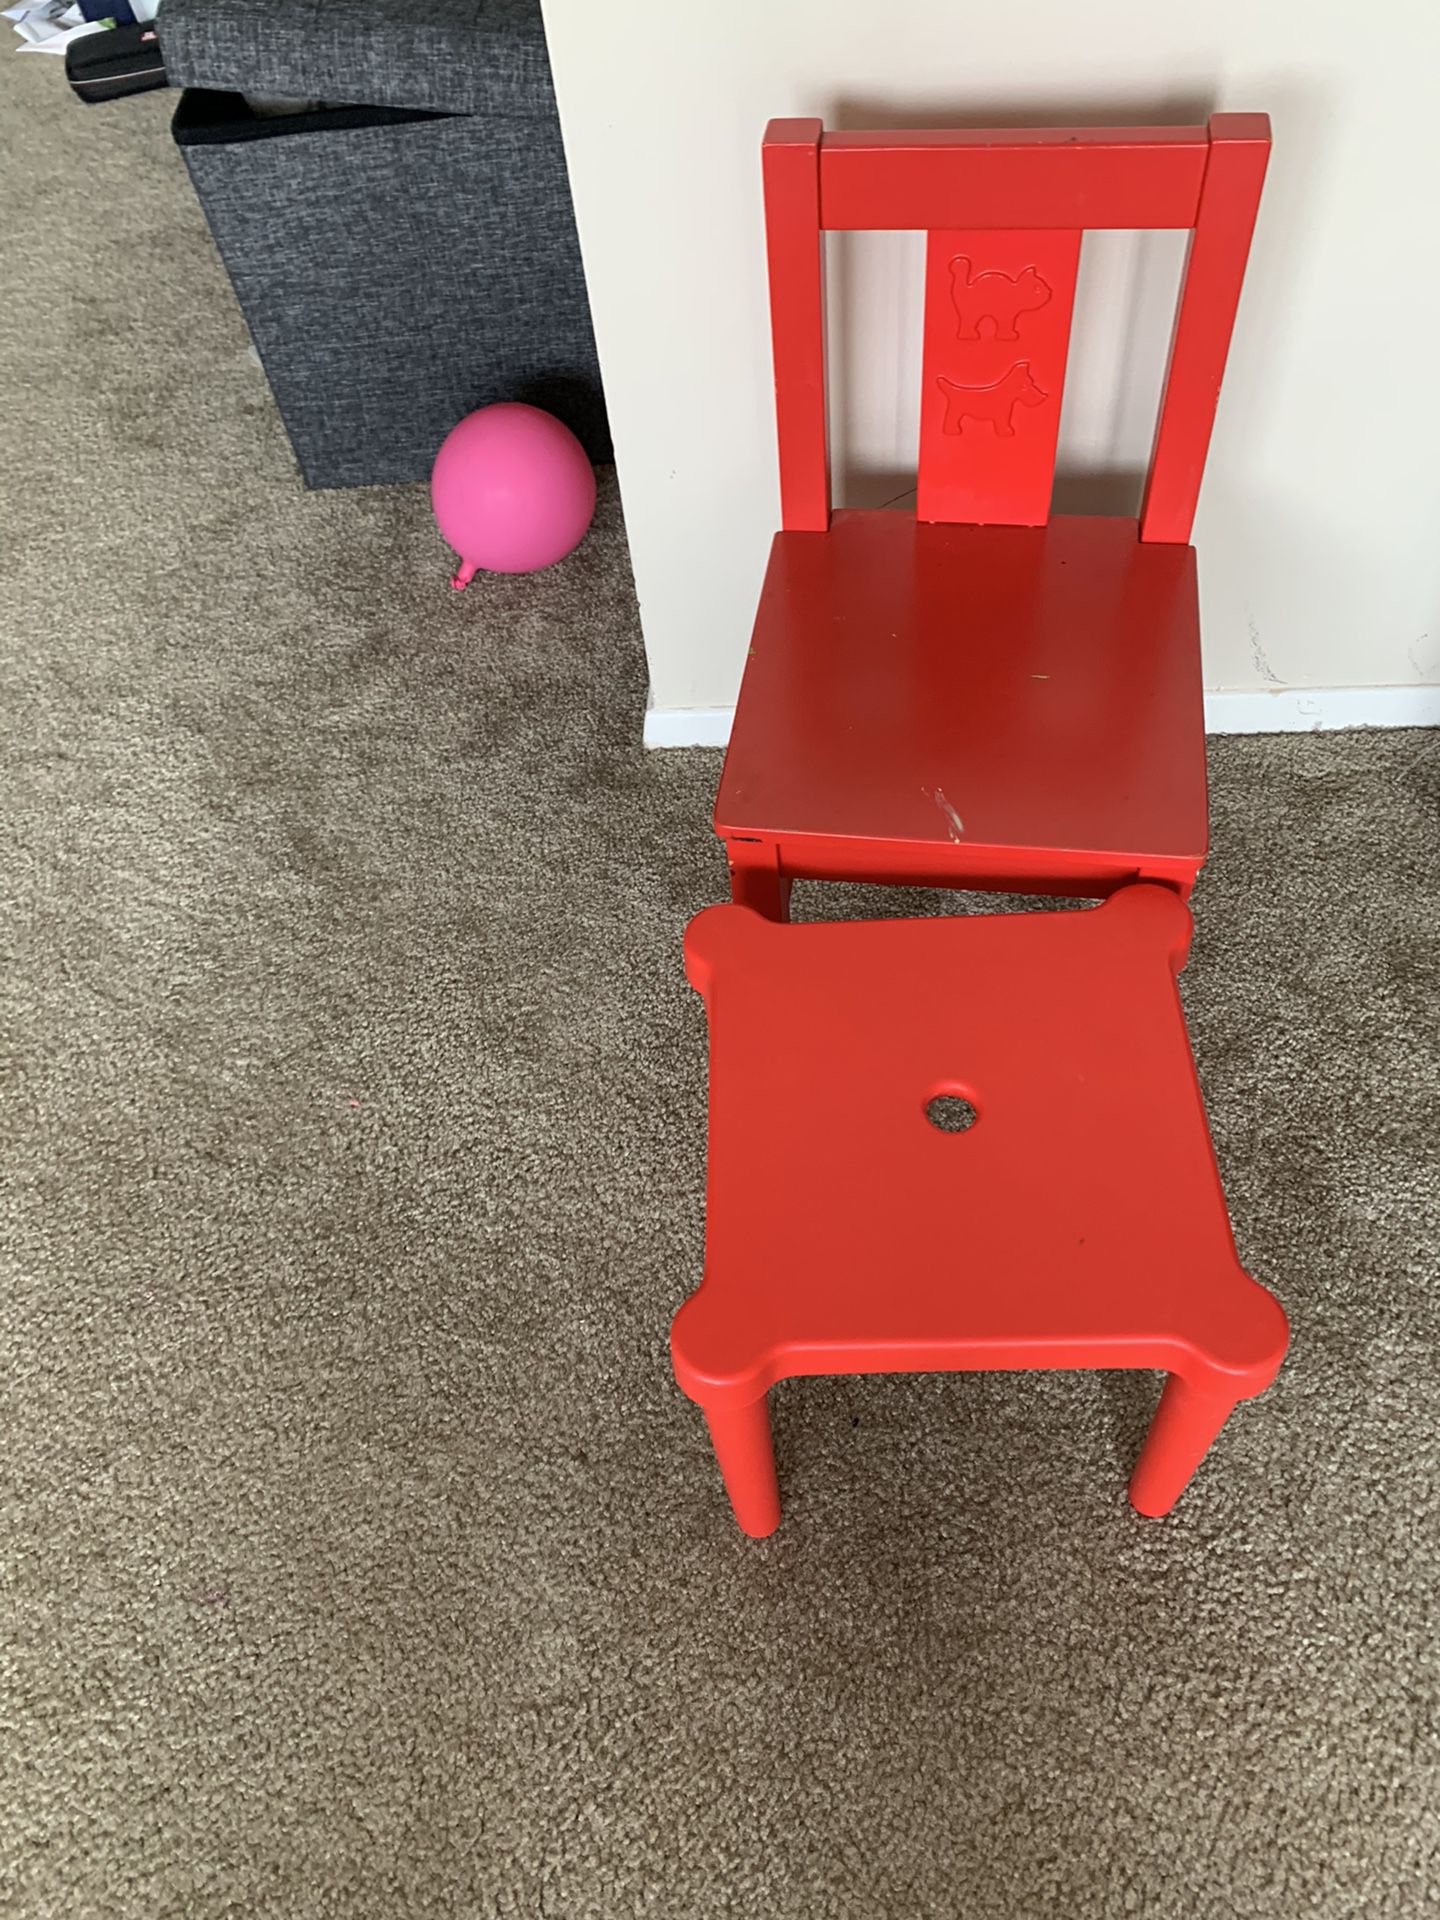 Little kids chair and stool 5$ for both